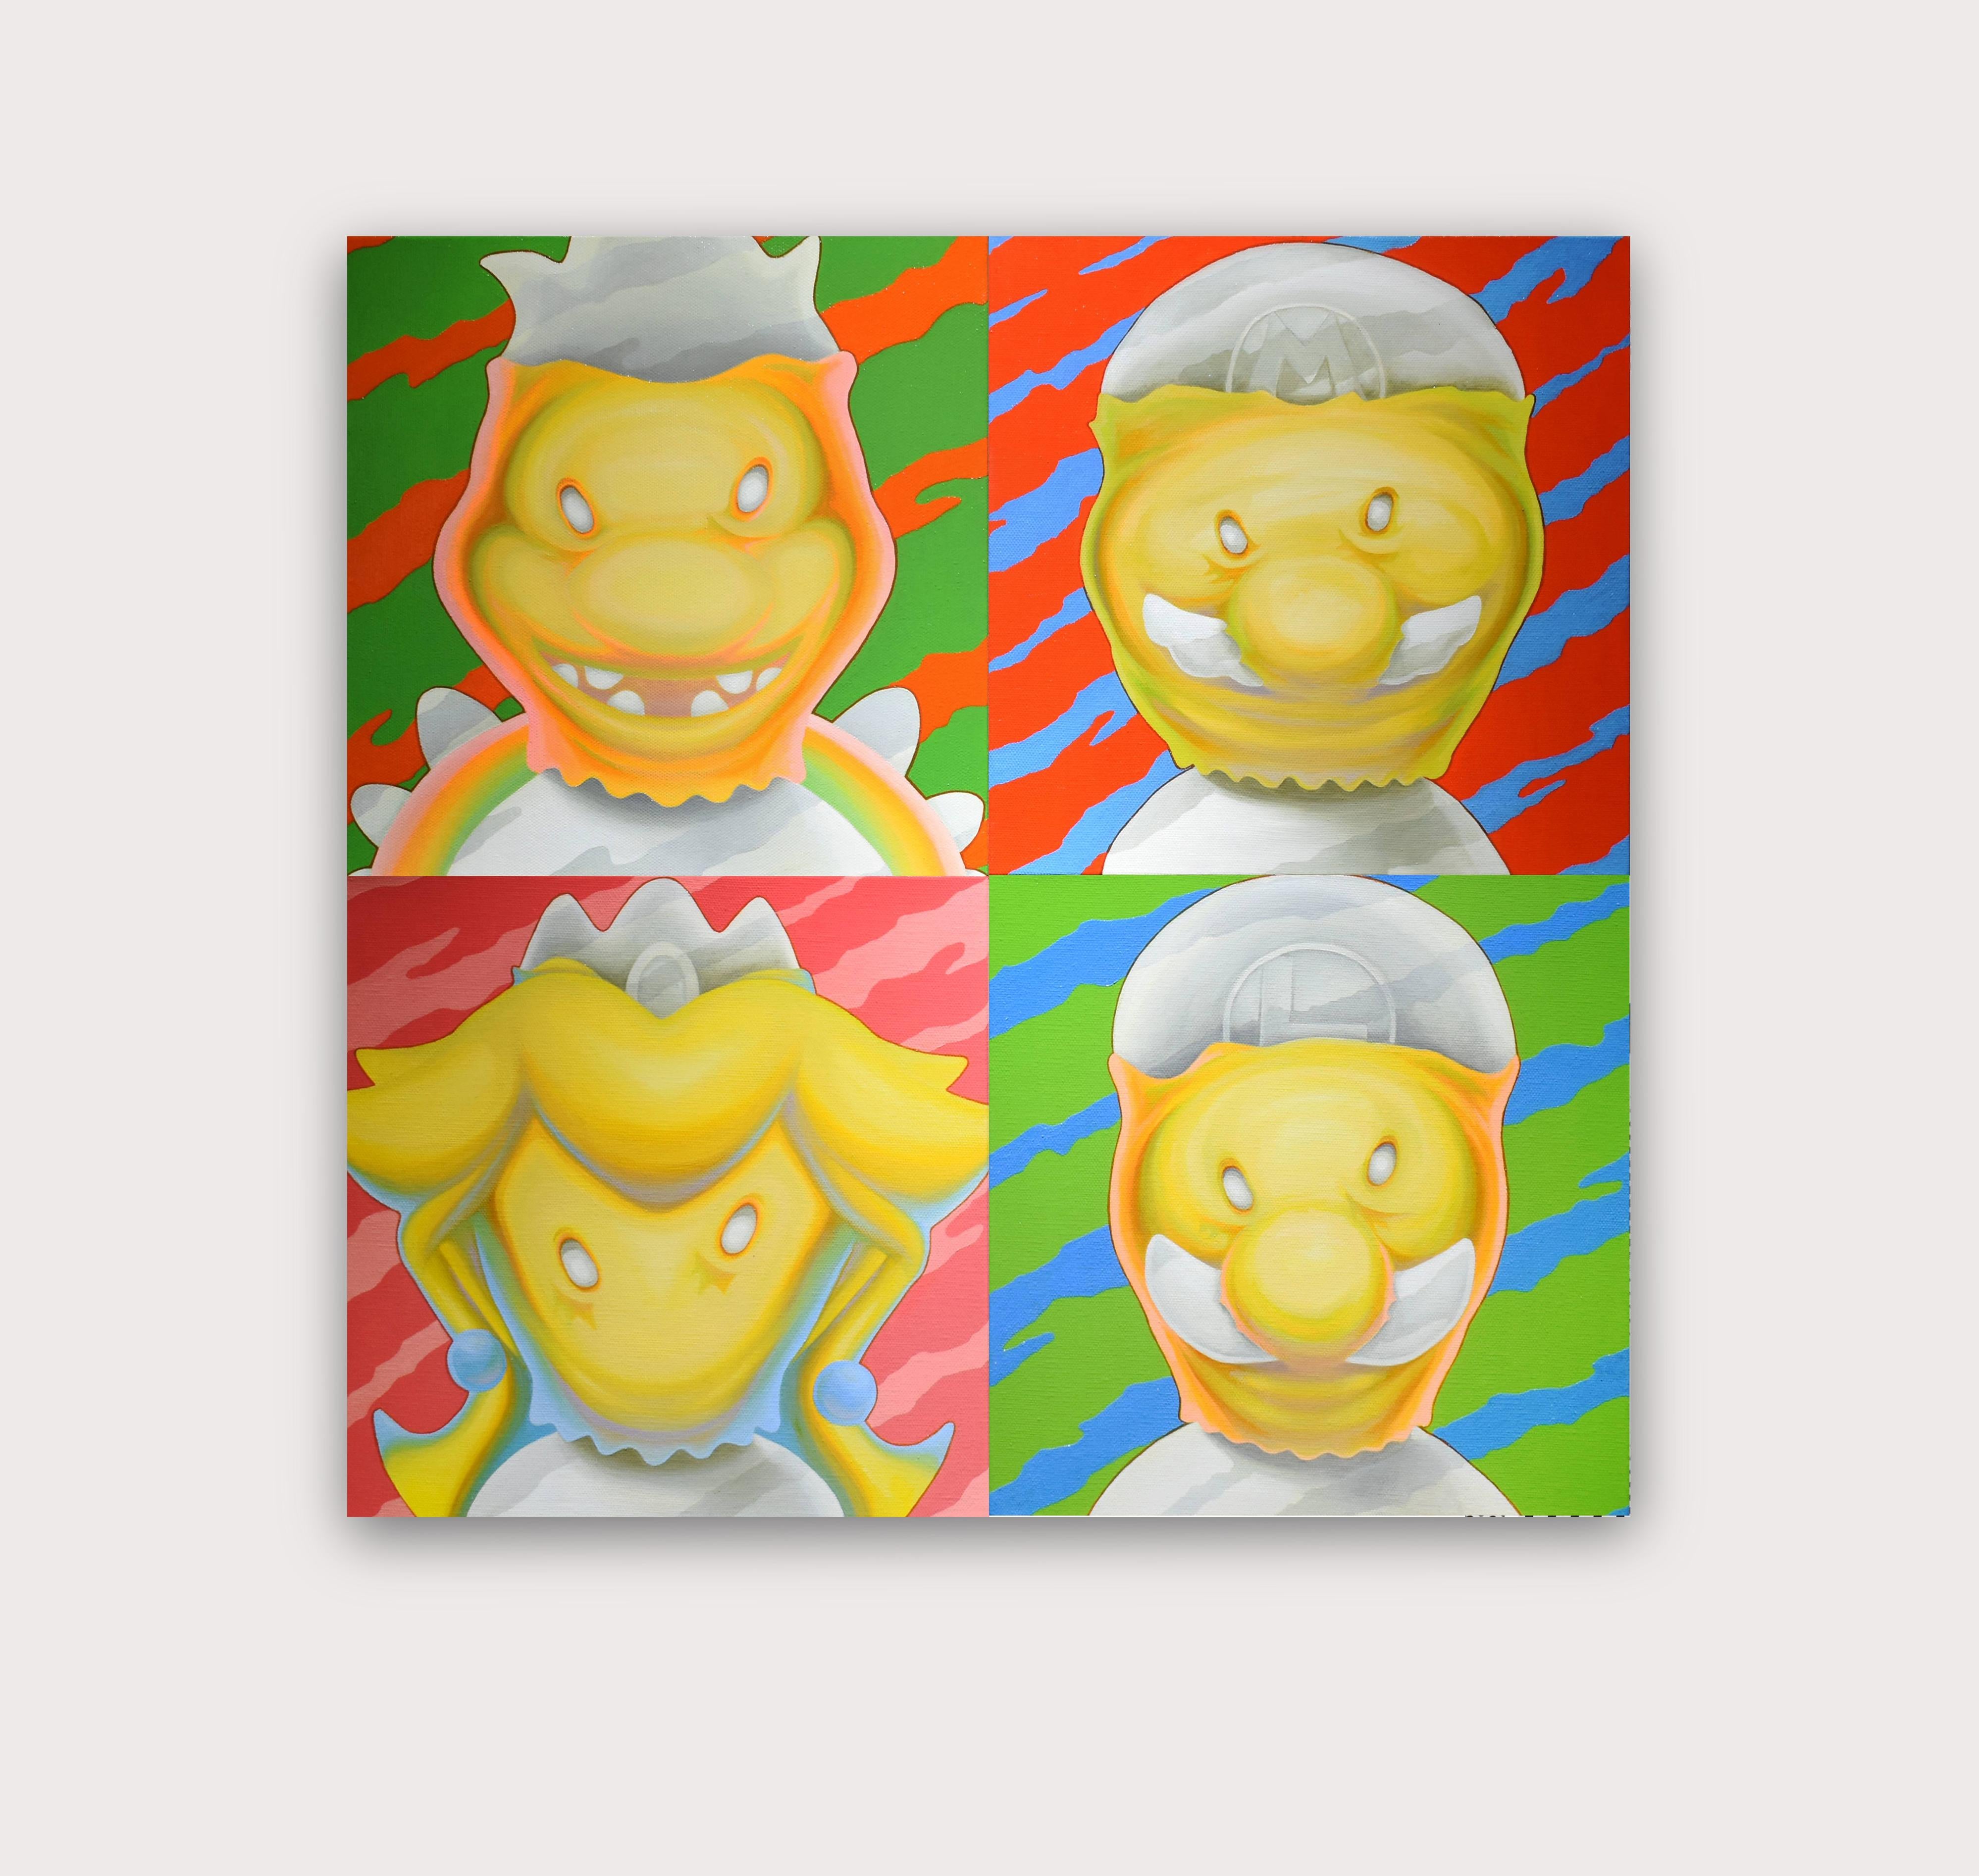 Look Back Classic. Inspired By Super Mario. Quadriptych Painted in Pop Art. - Painting by Chris Tan